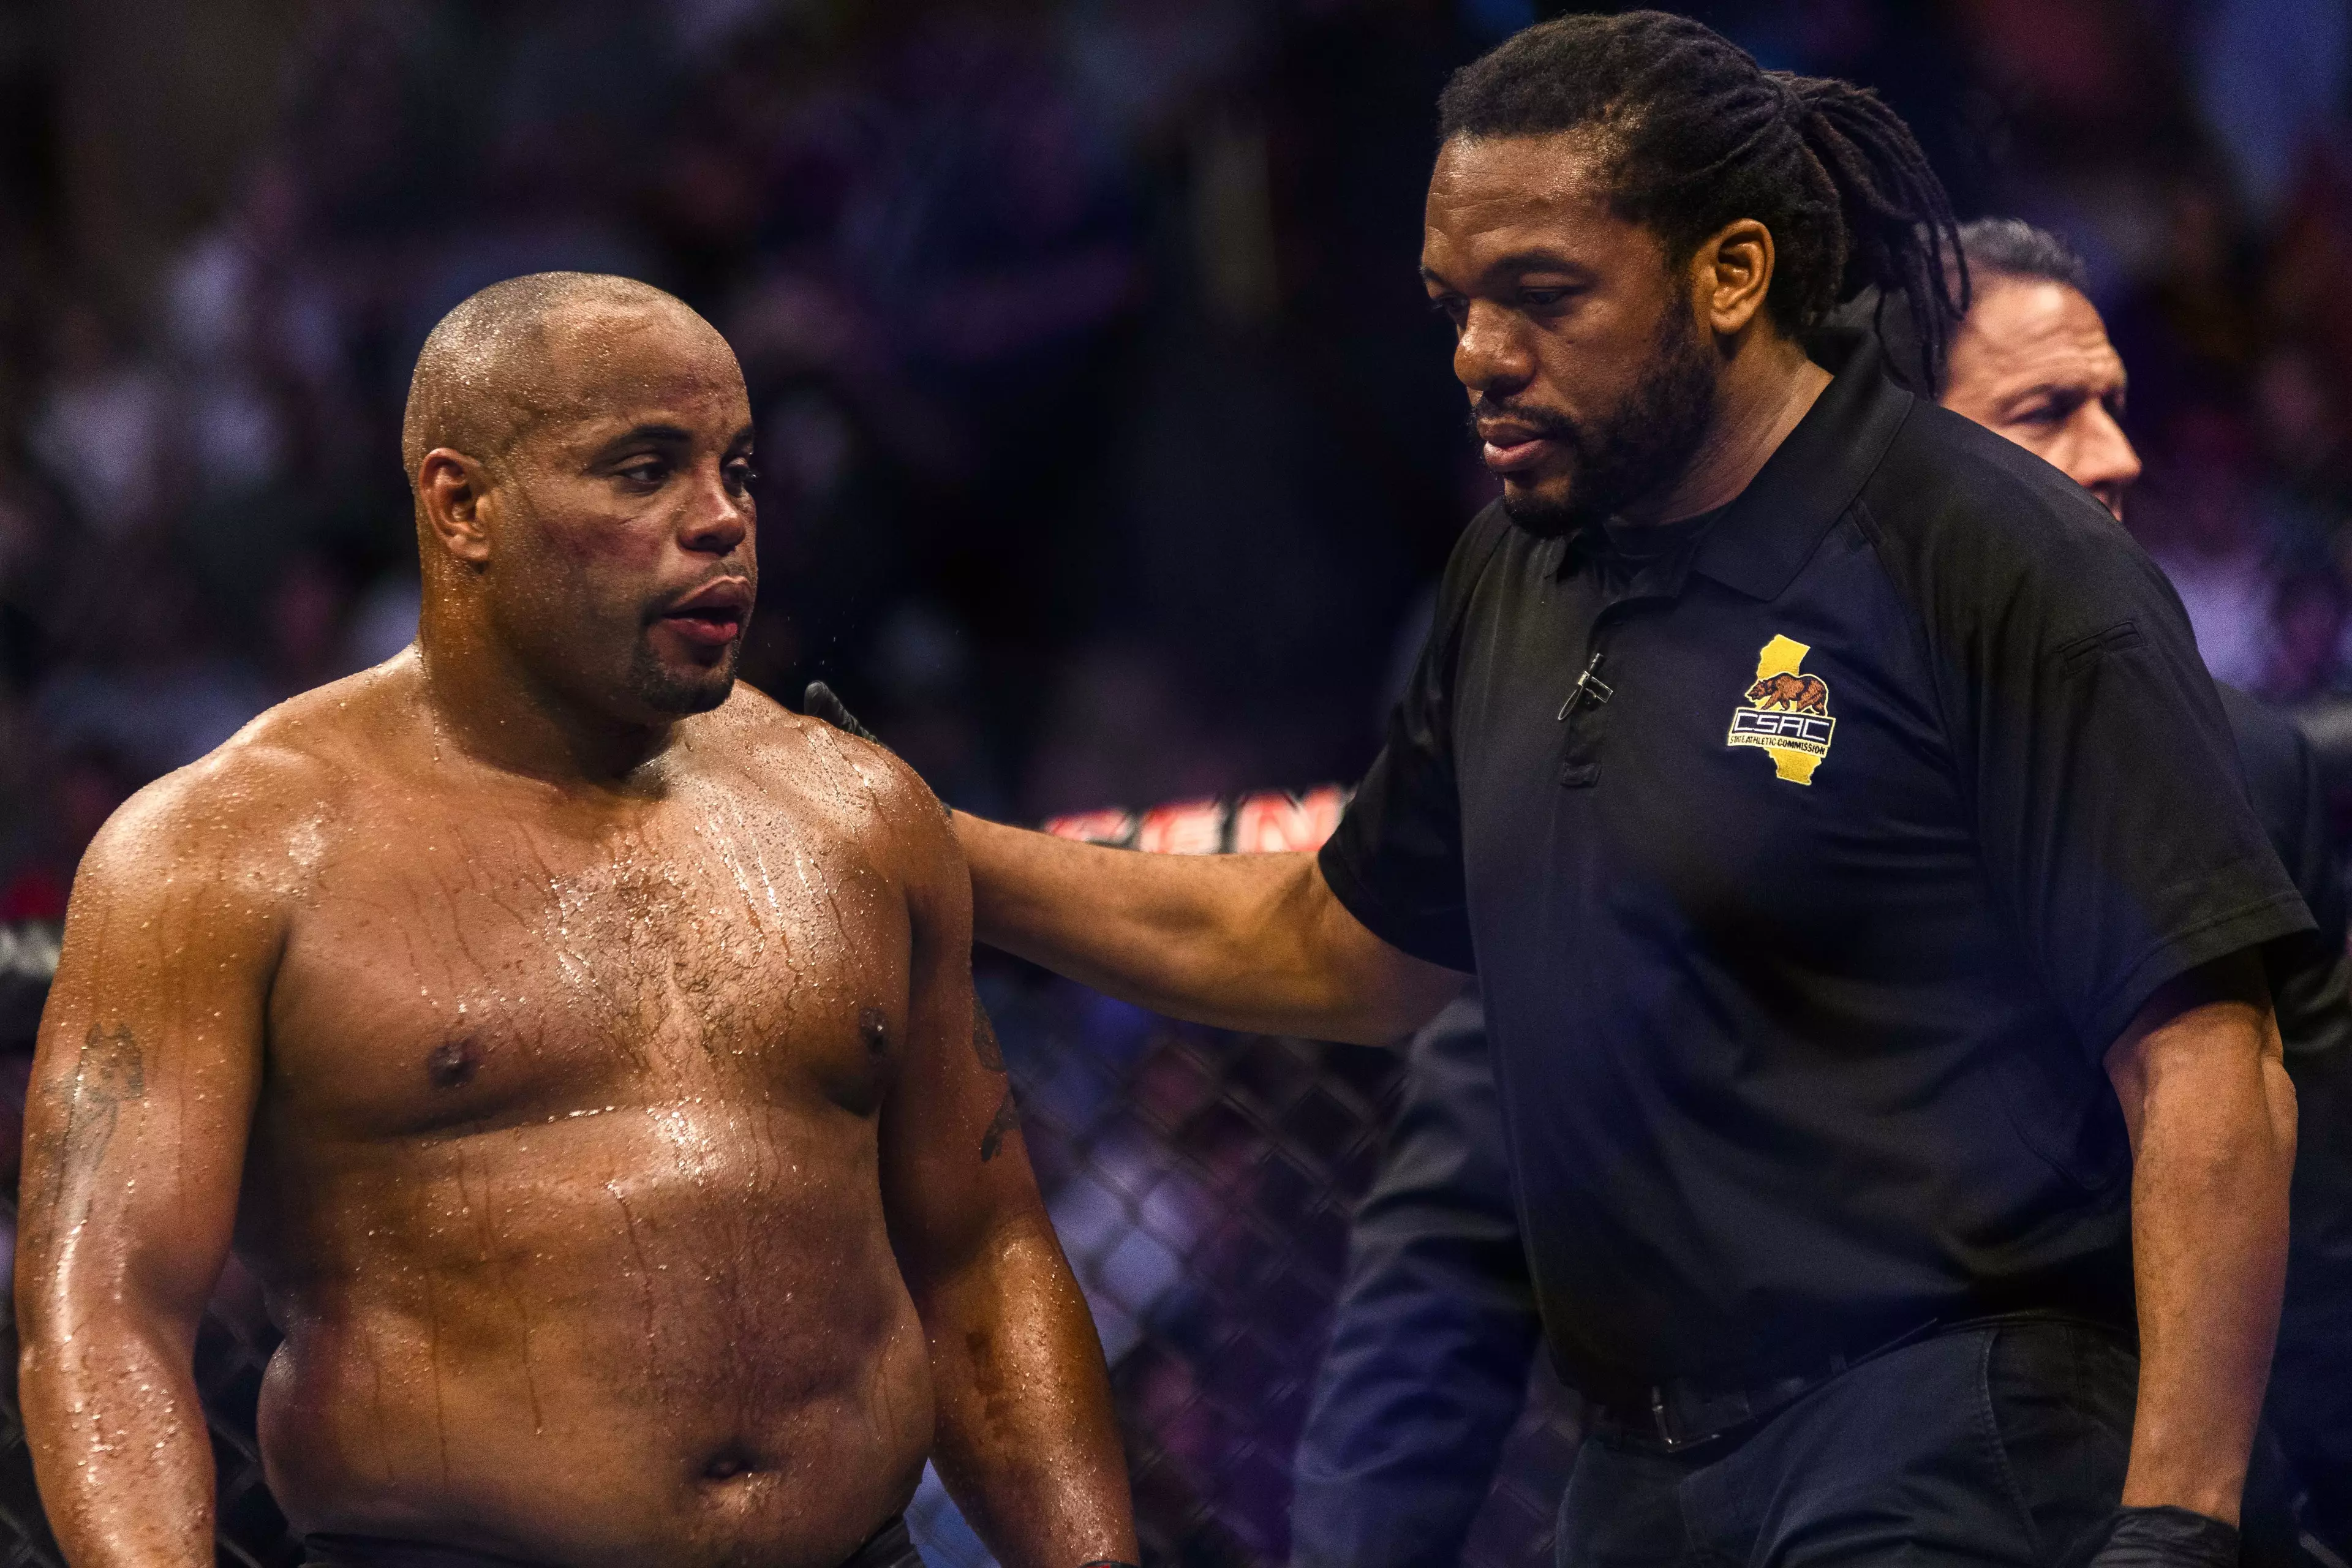 Daniel Cormier is considering retiring from UFC after his defeat in Anaheim